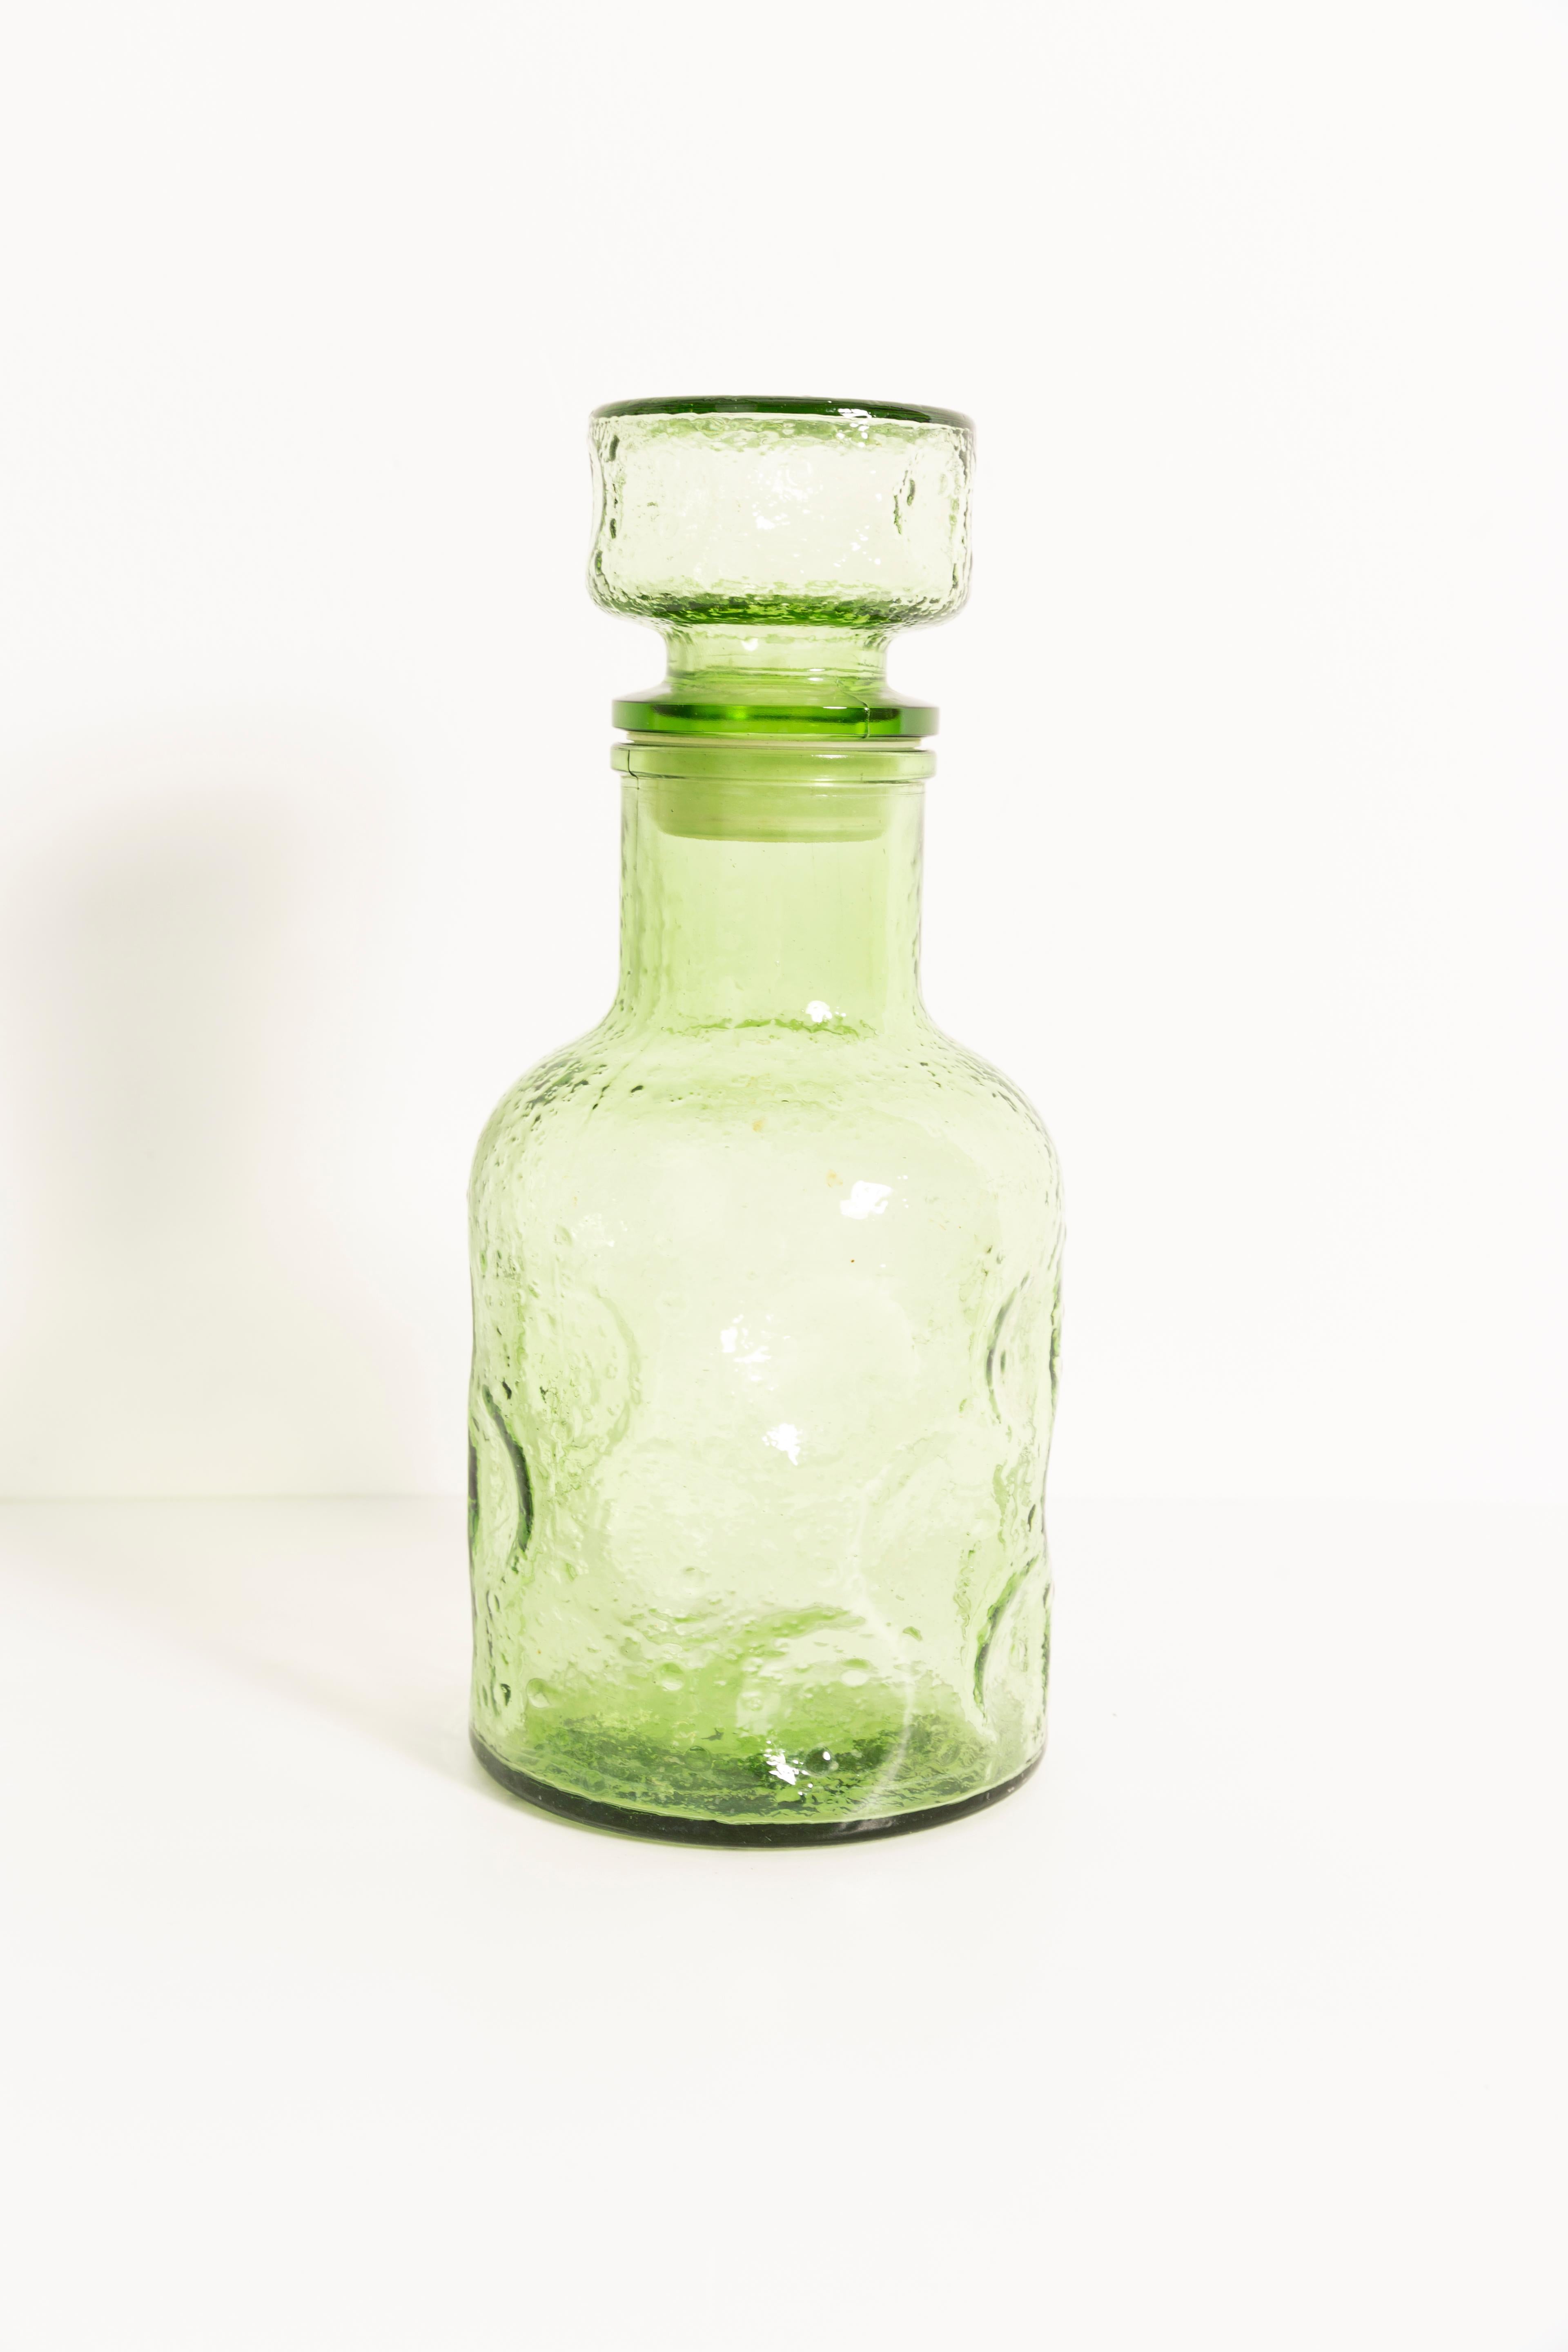 A stunning light green decanter with geometric design, made by one of the many glass manufacturers based in the region of Empoli, Italy. Would make a great addition to any collection! Excellent condition, no chips or cracks other than a couple of